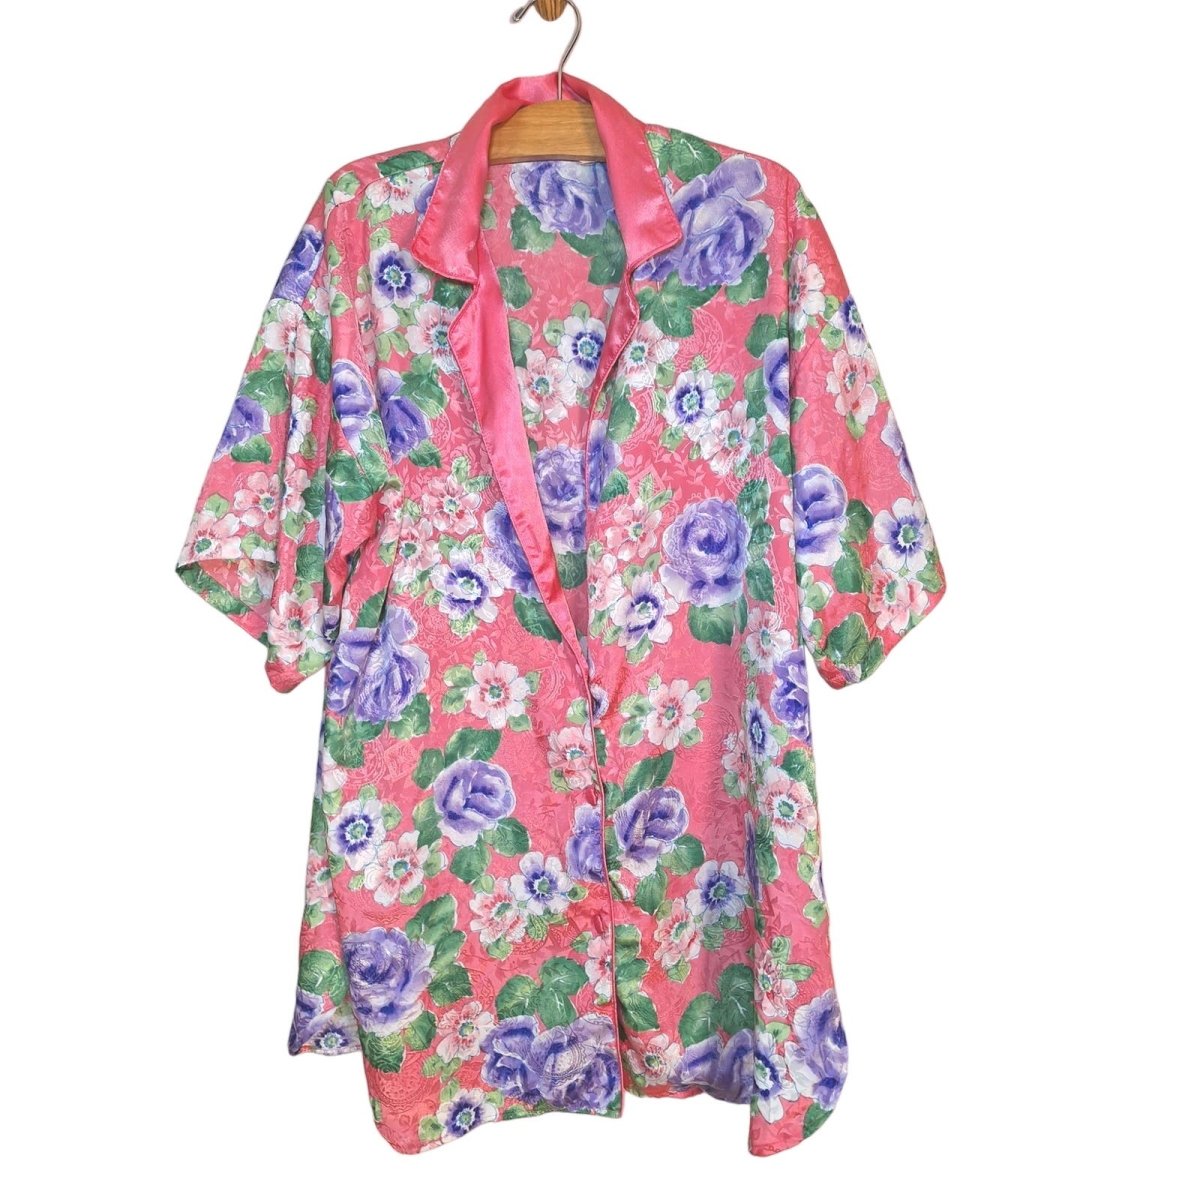 Vintage 90s VS Floral Embossed Satin Sleep Shirt Women Size M/L - themallvintage The Mall Vintage